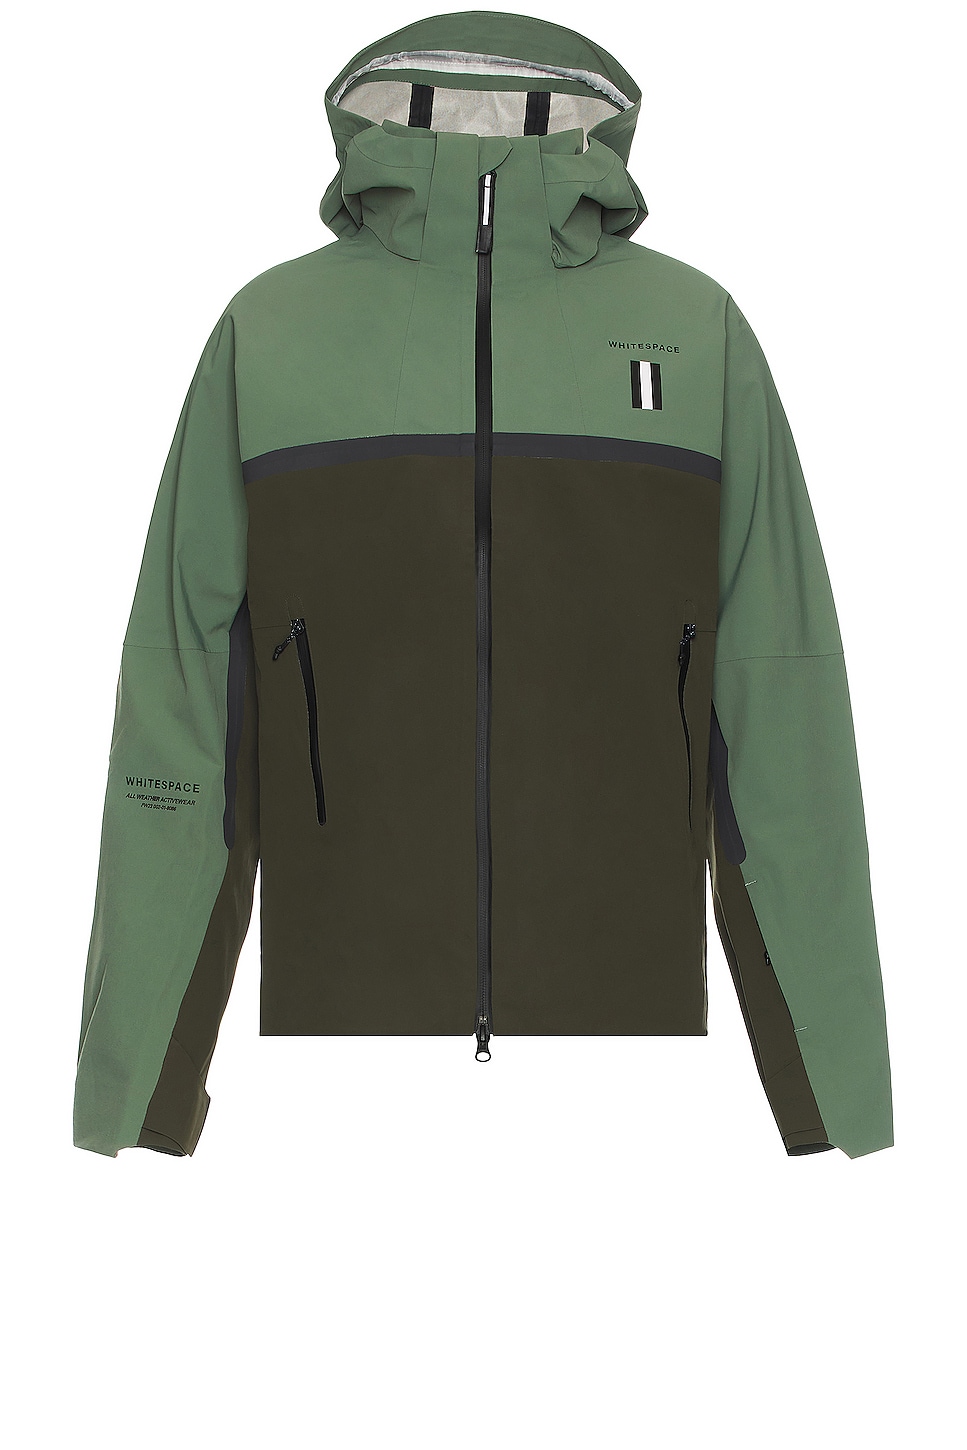 Image 1 of Whitespace 3l Performance Jacket in Laurel Green & Forest Green